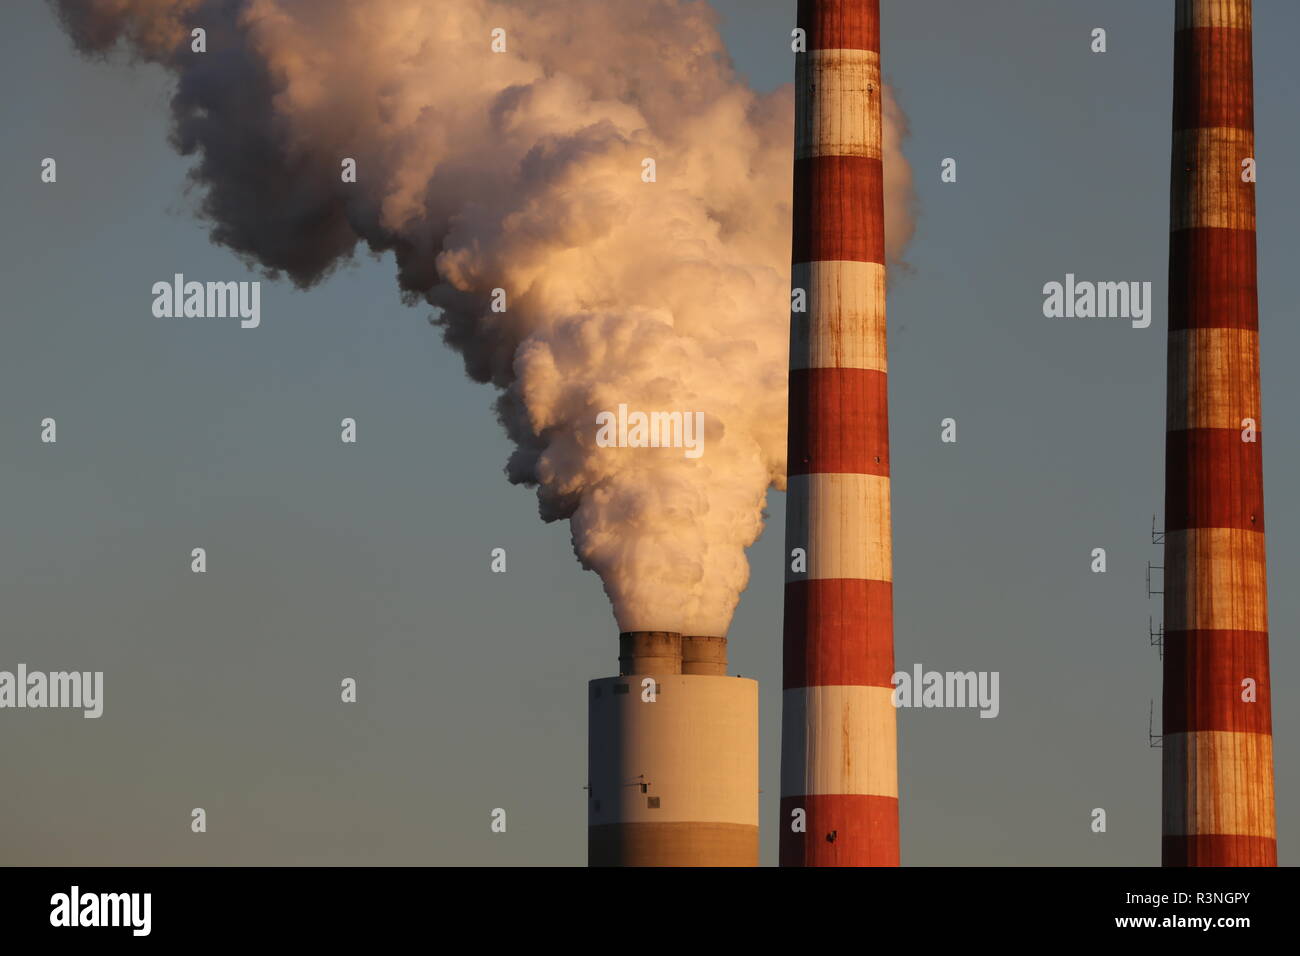 white smoke from scrubber installed chimney at energy generating plant, Stock Photo